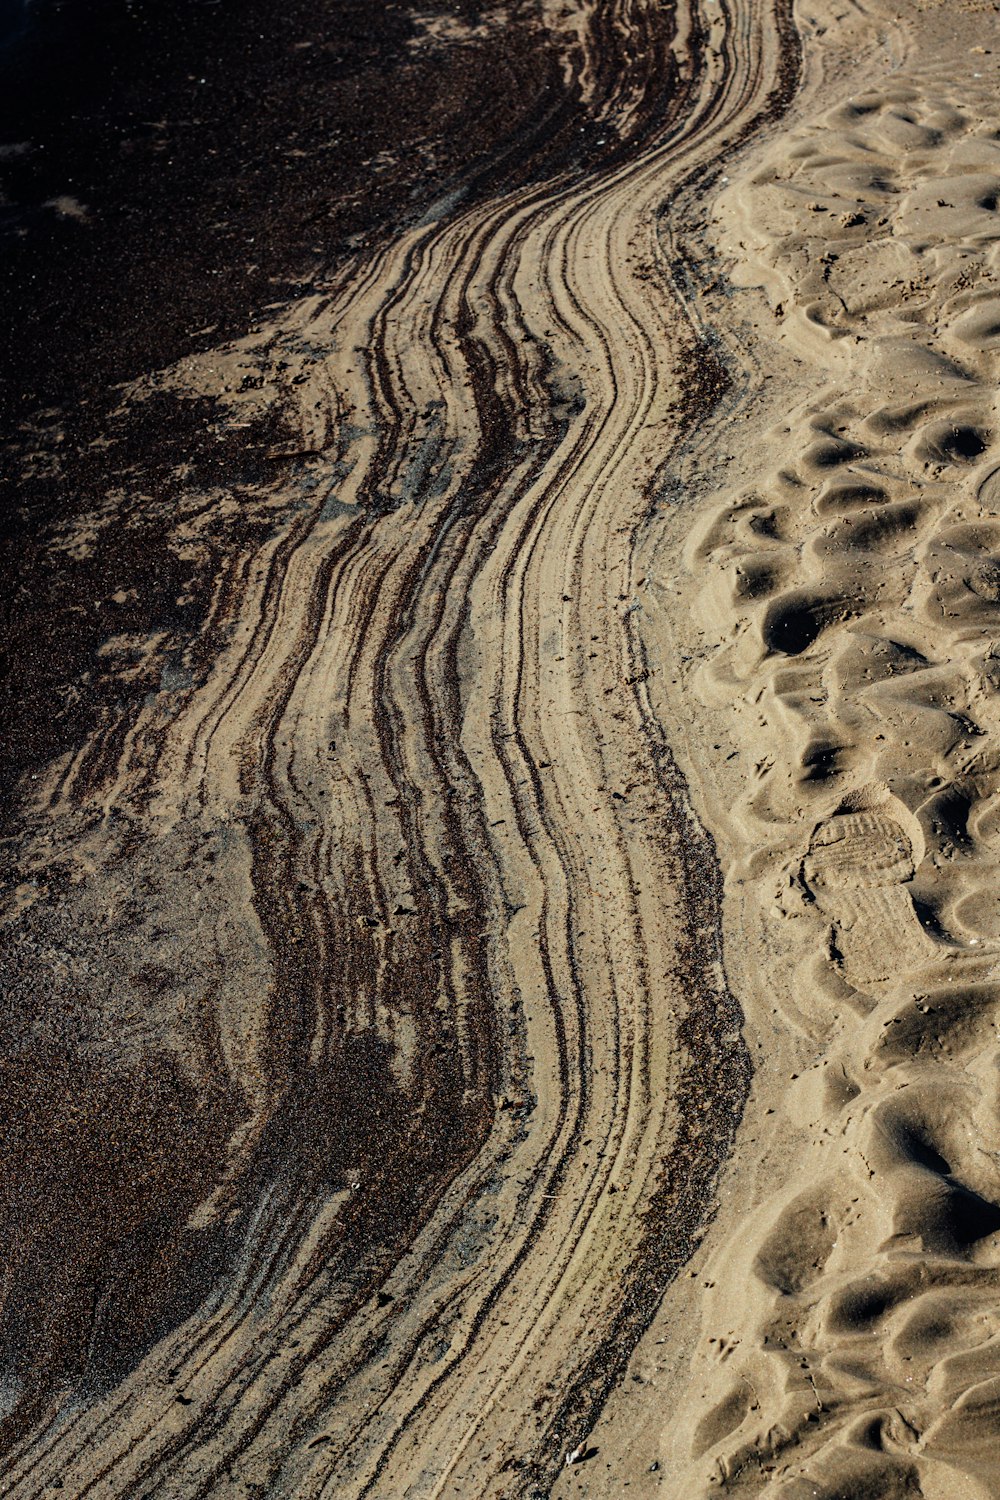 a view of a sandy beach with tracks in the sand